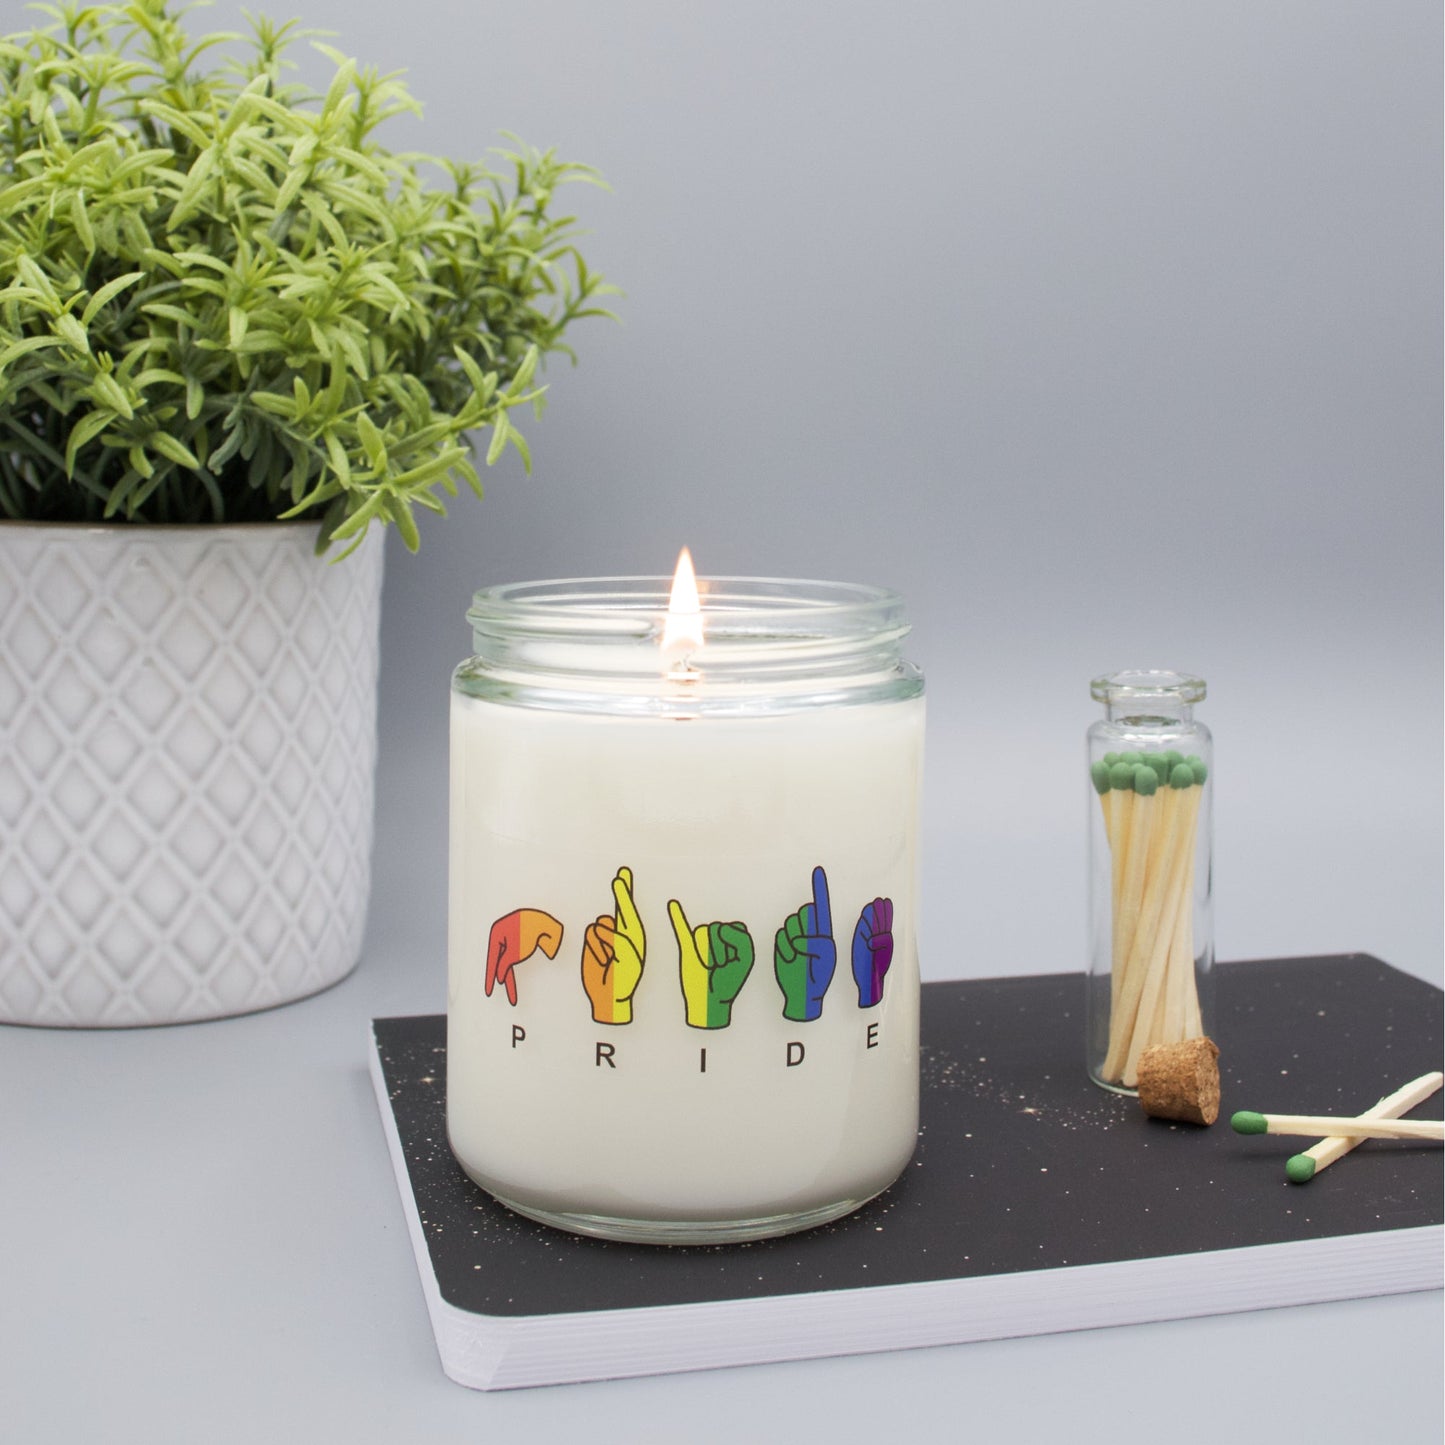 American Sign Language (ASL) Pride - Scented Candle